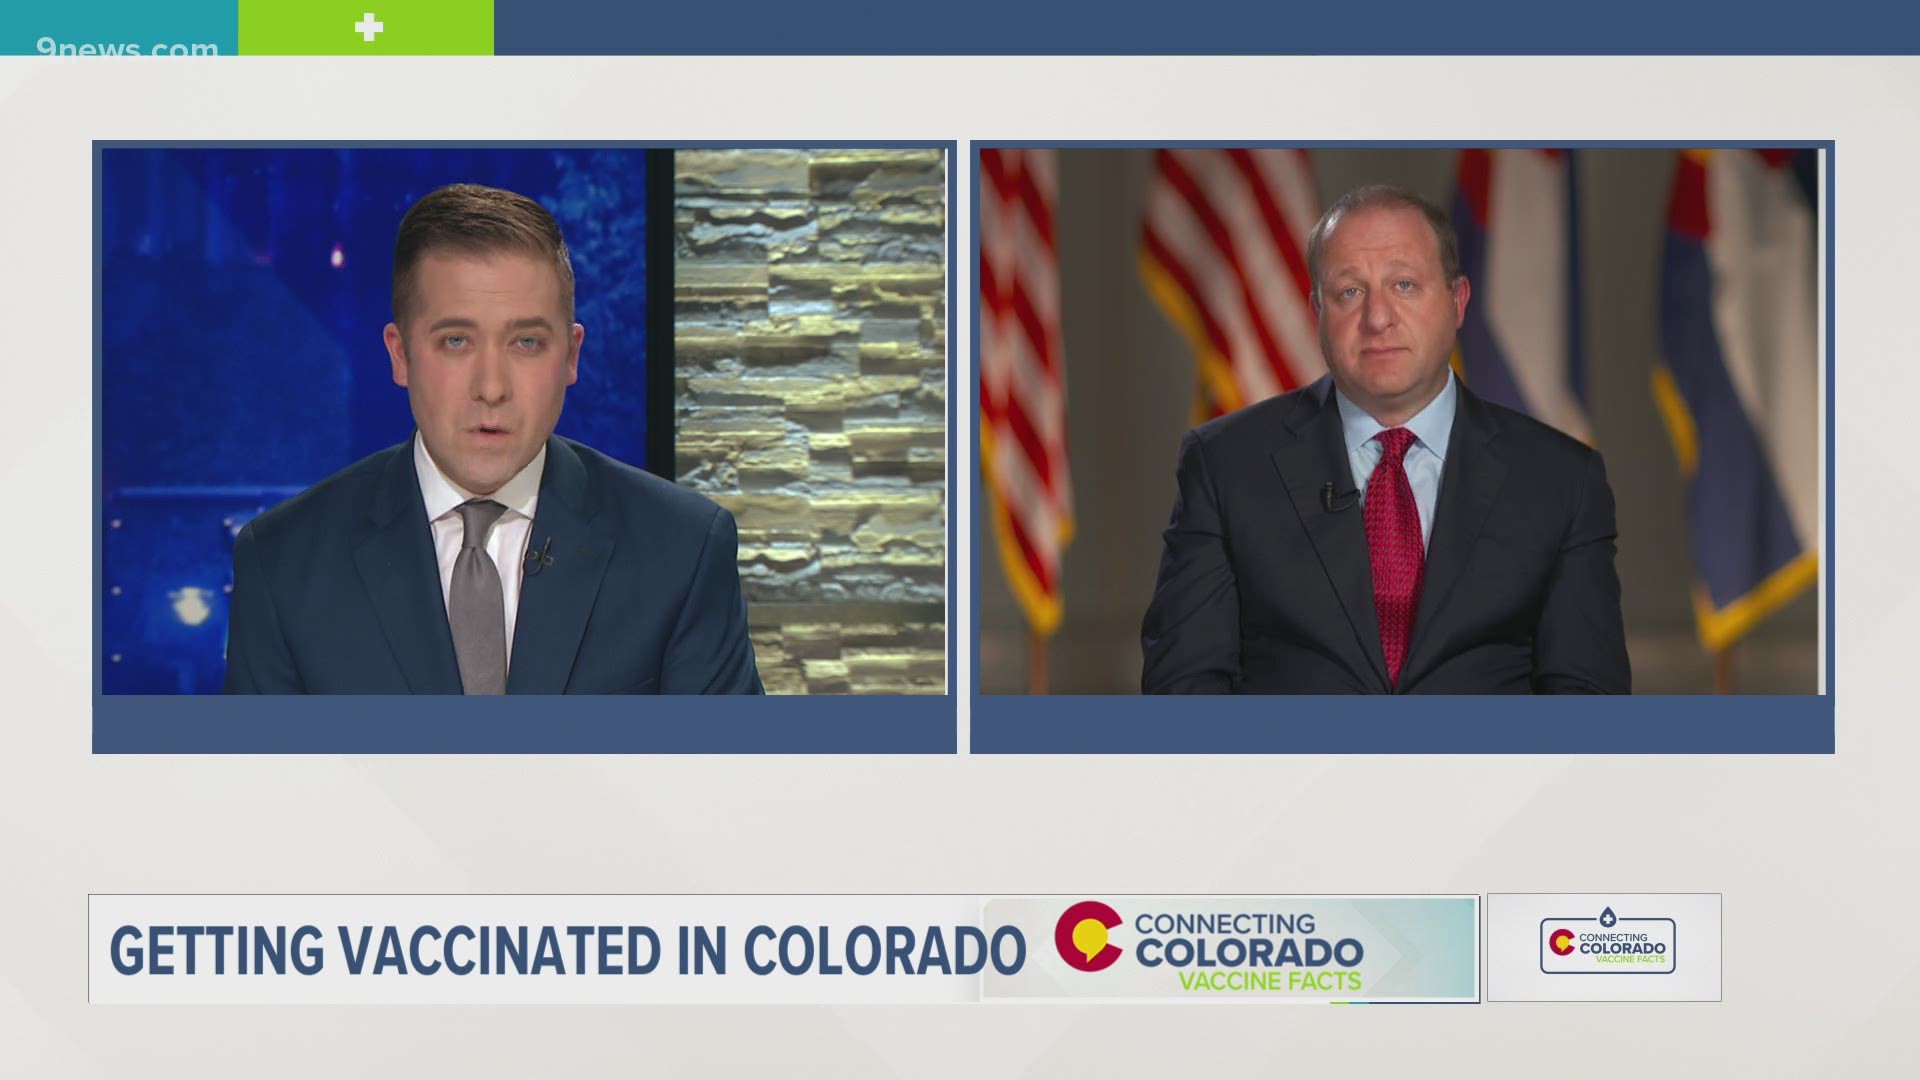 9NEWS compiled questions on the COVID-19 vaccine and inoculation process for a town hall Feb. 2 with Gov. Jared Polis and other expert panelists.